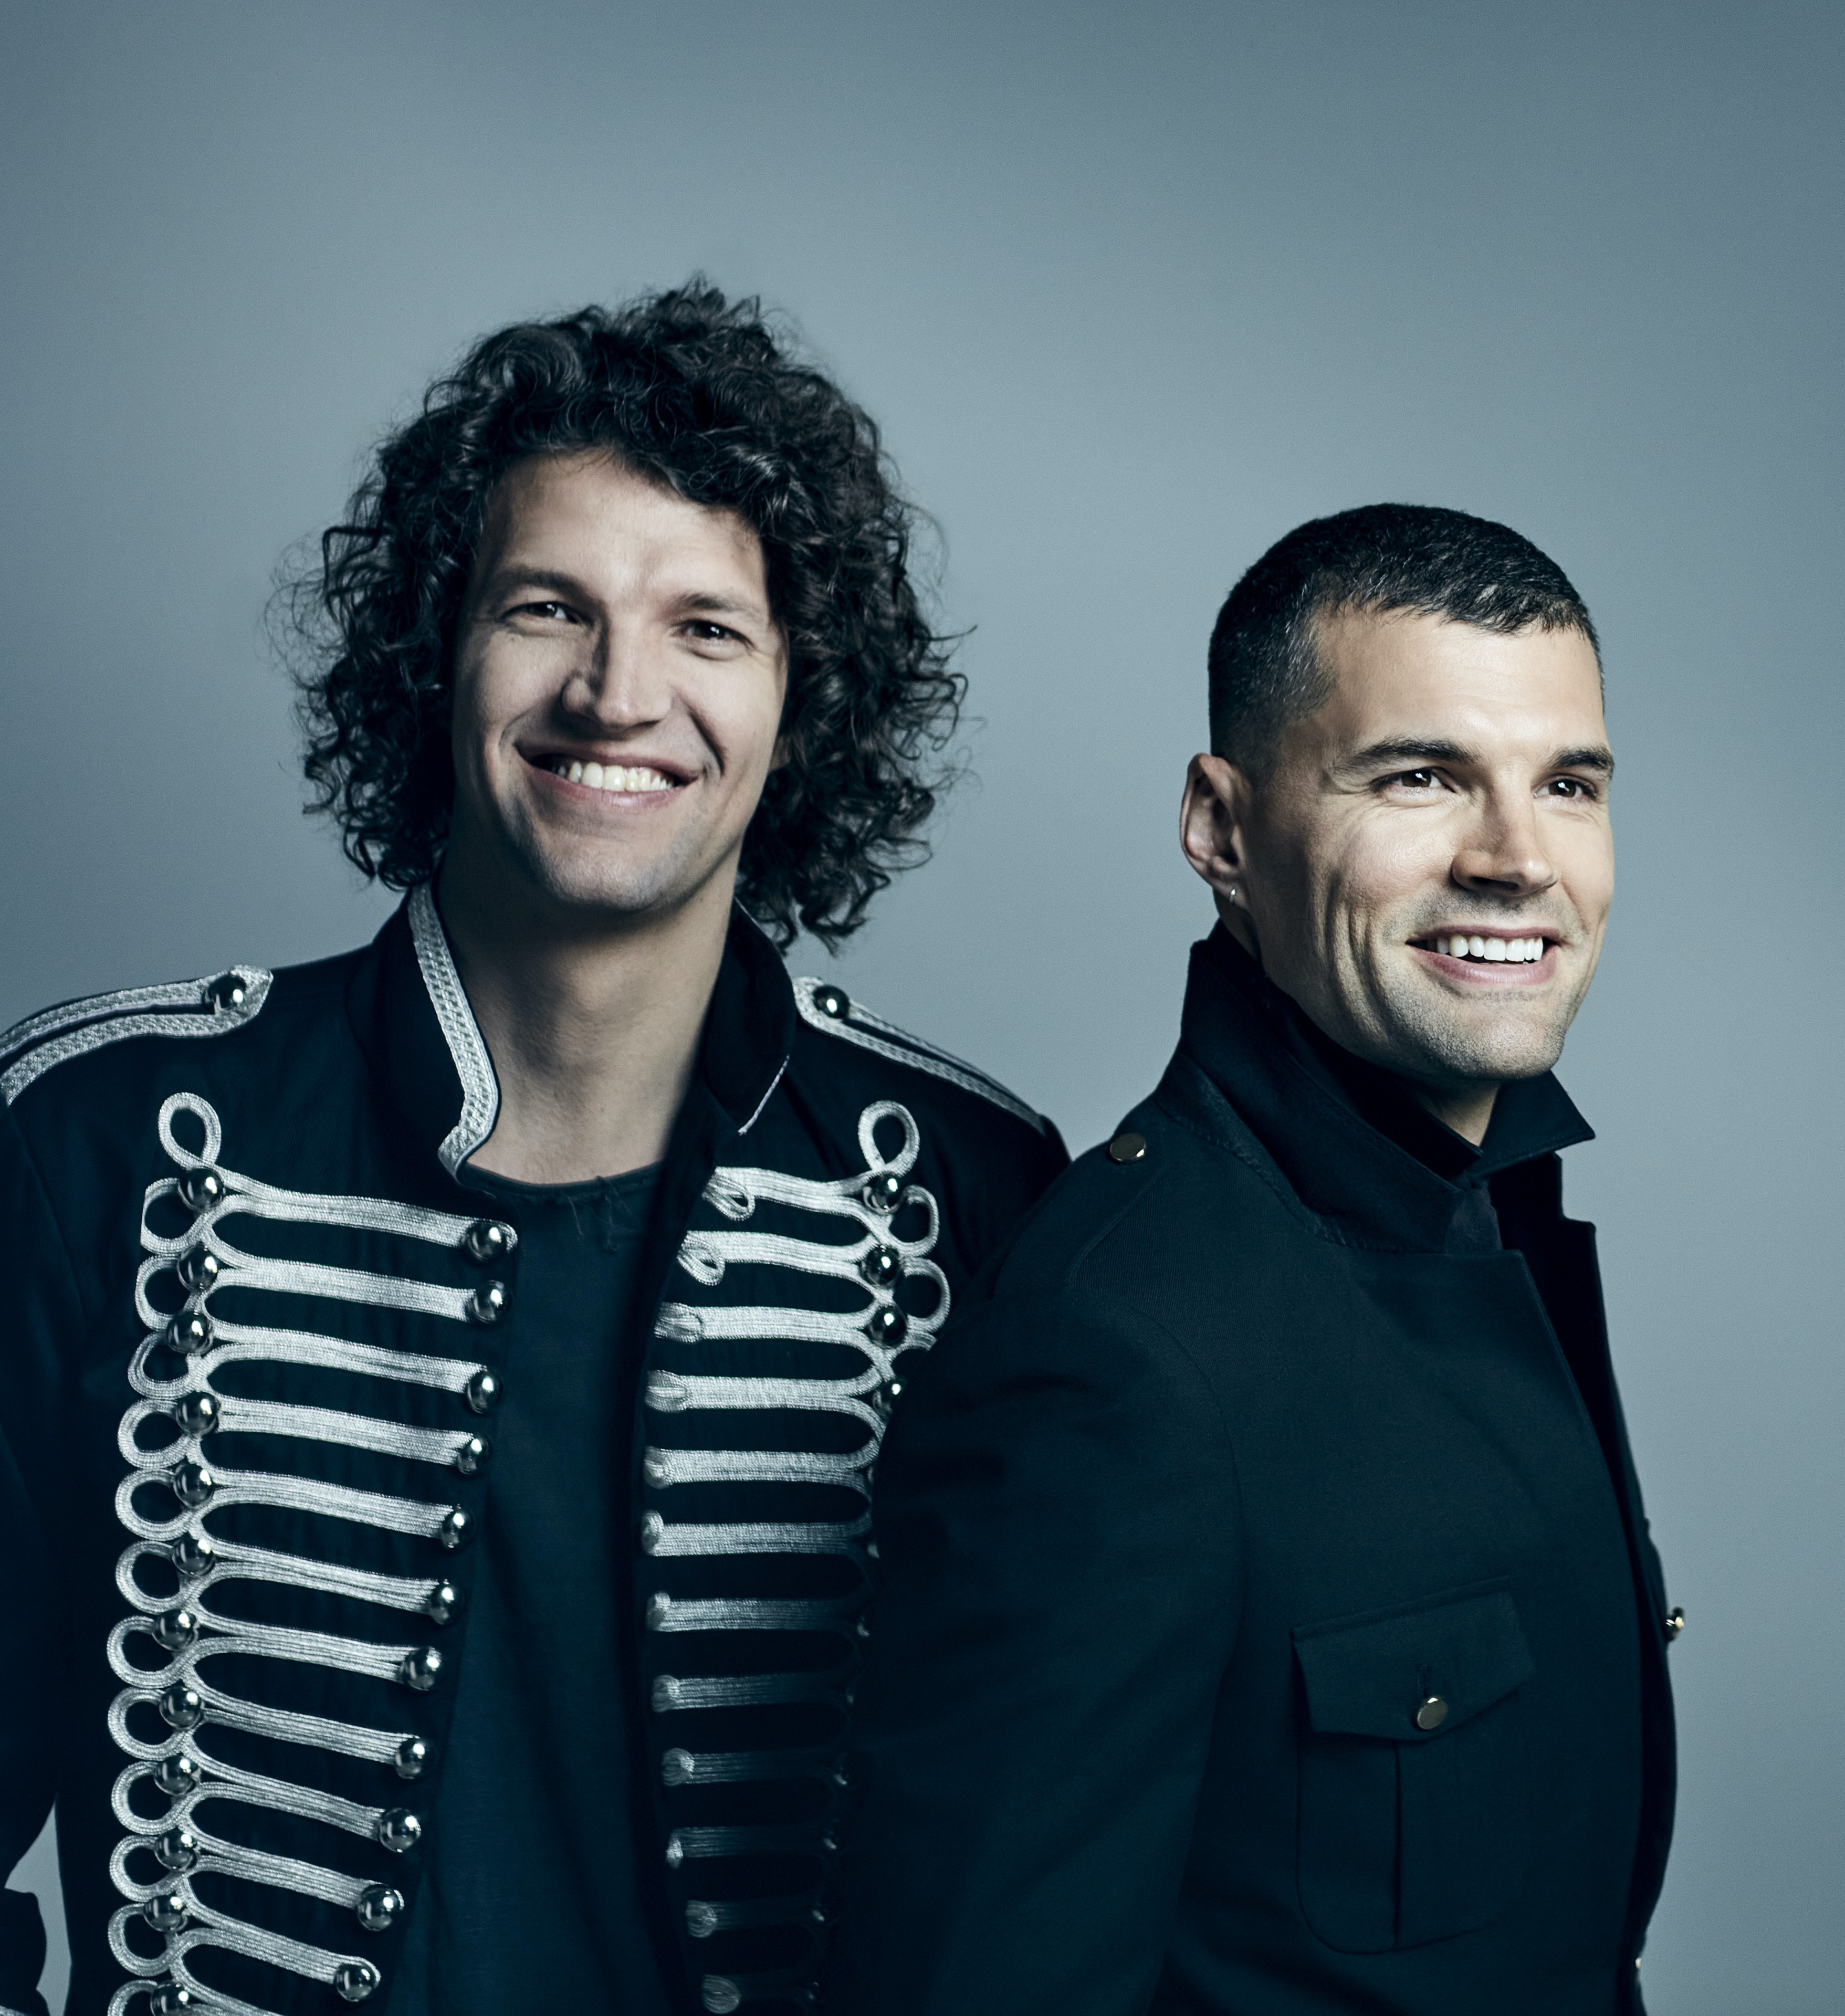 For King & Country Looks to Offer Hope With New Christmas Album ‘A Drummer Boy Christmas’